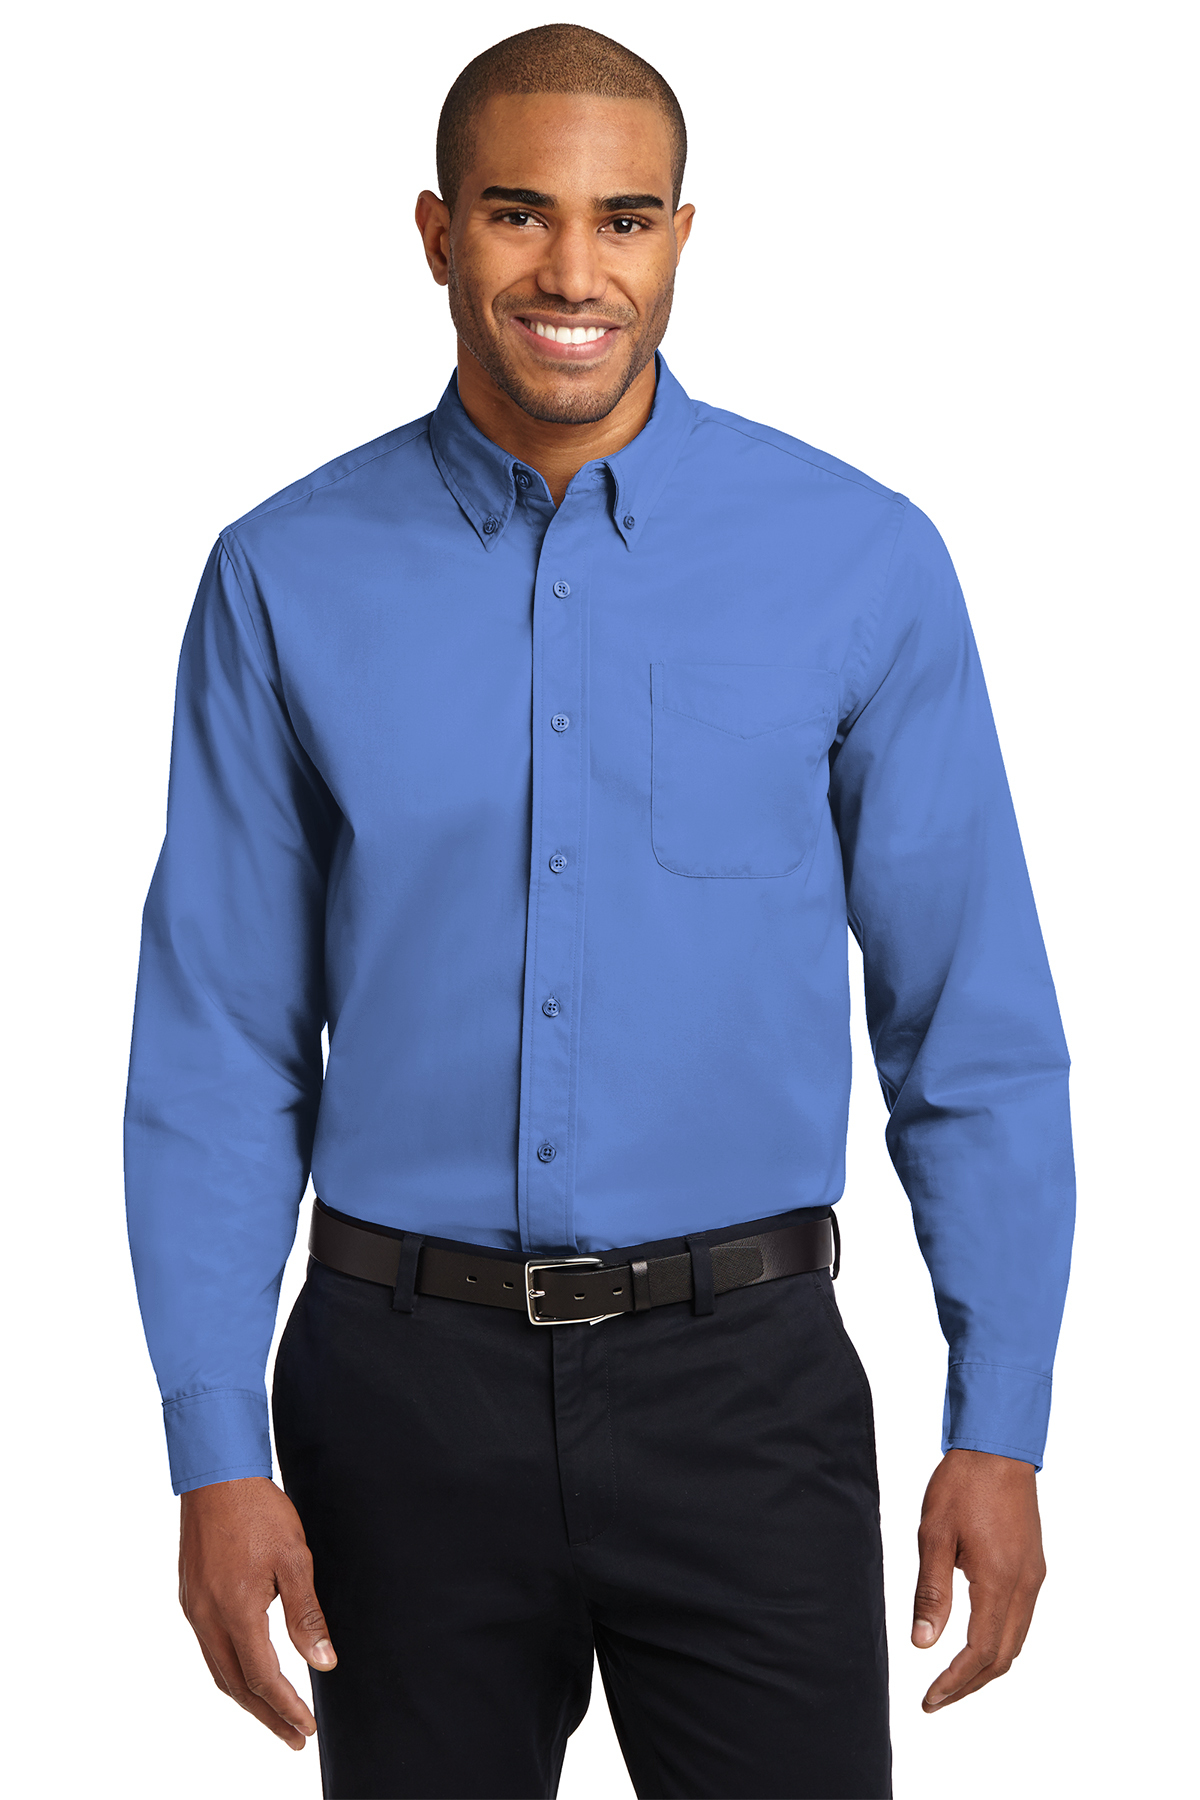 Port Authority Tall Long Sleeve Easy Care Shirt, Product